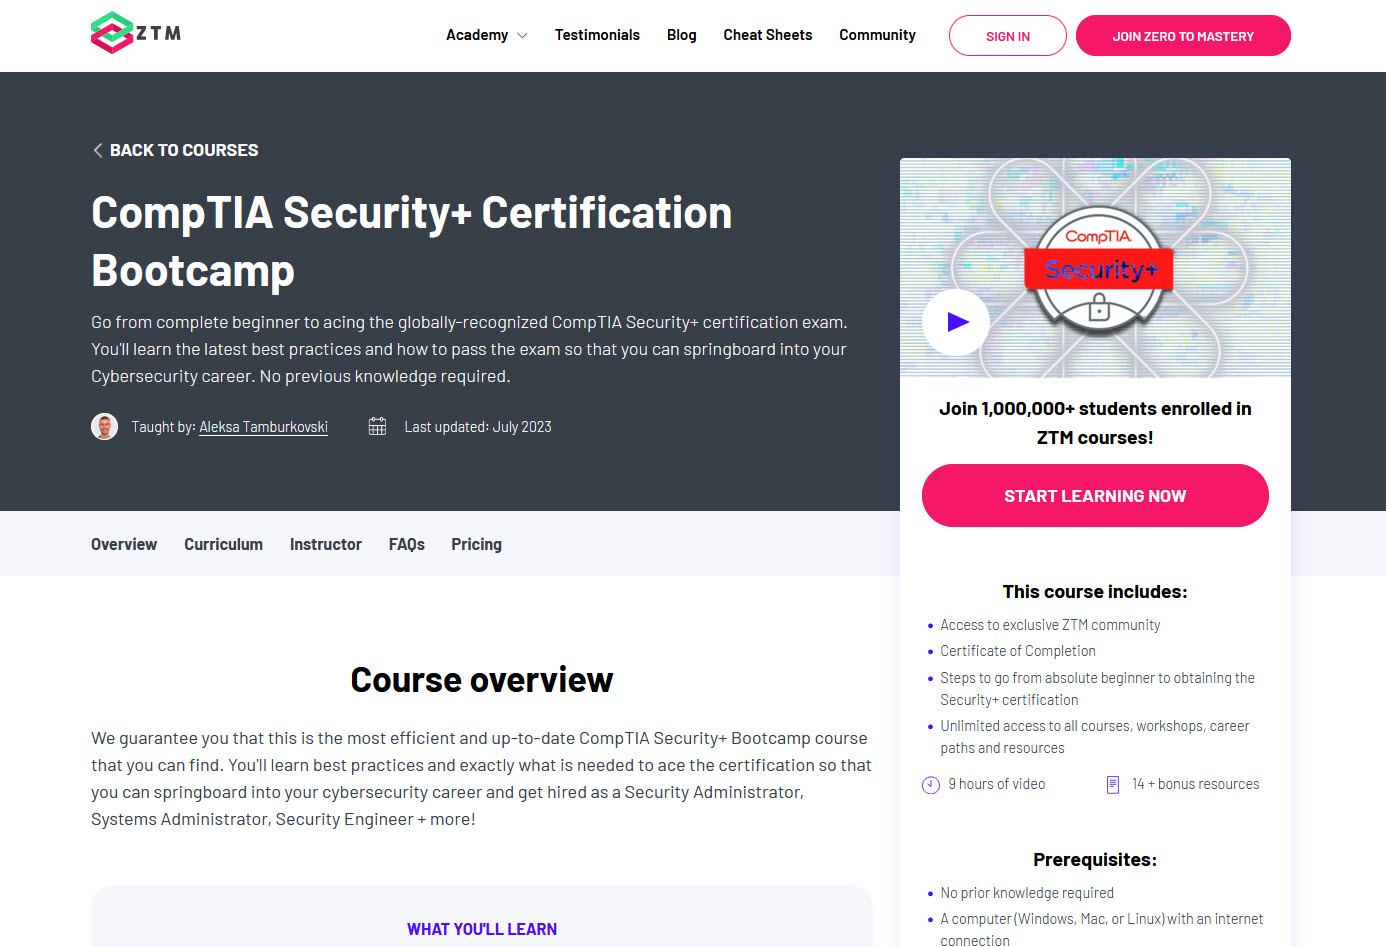 learn how to pass the comptia security+ exam